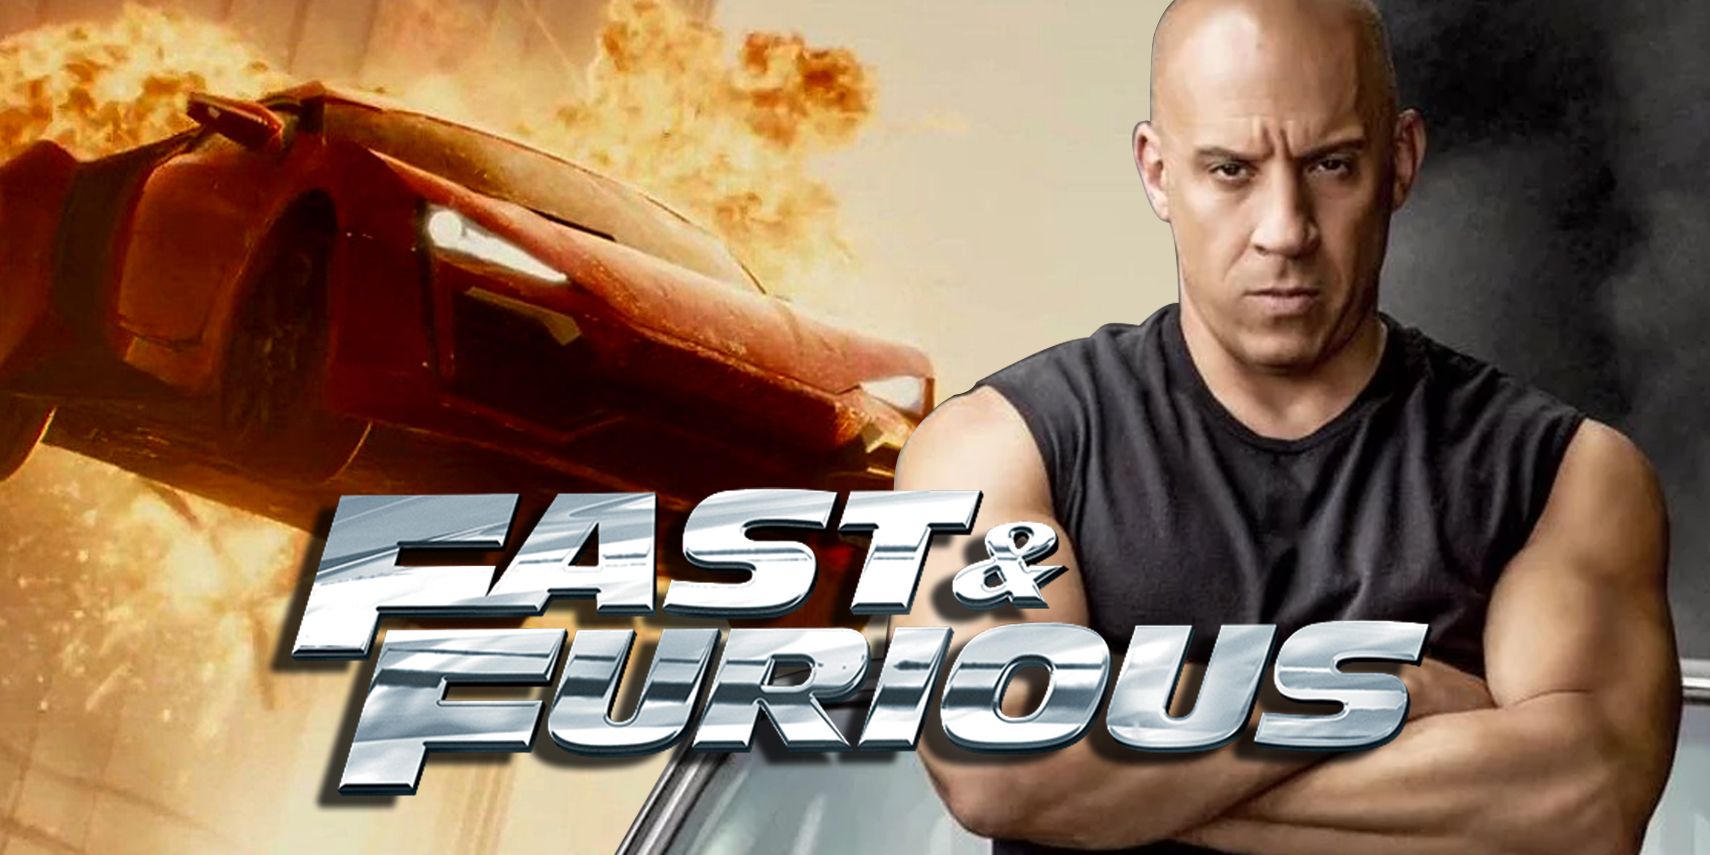 The remarkable evolution of the Fast and Furious movie franchise